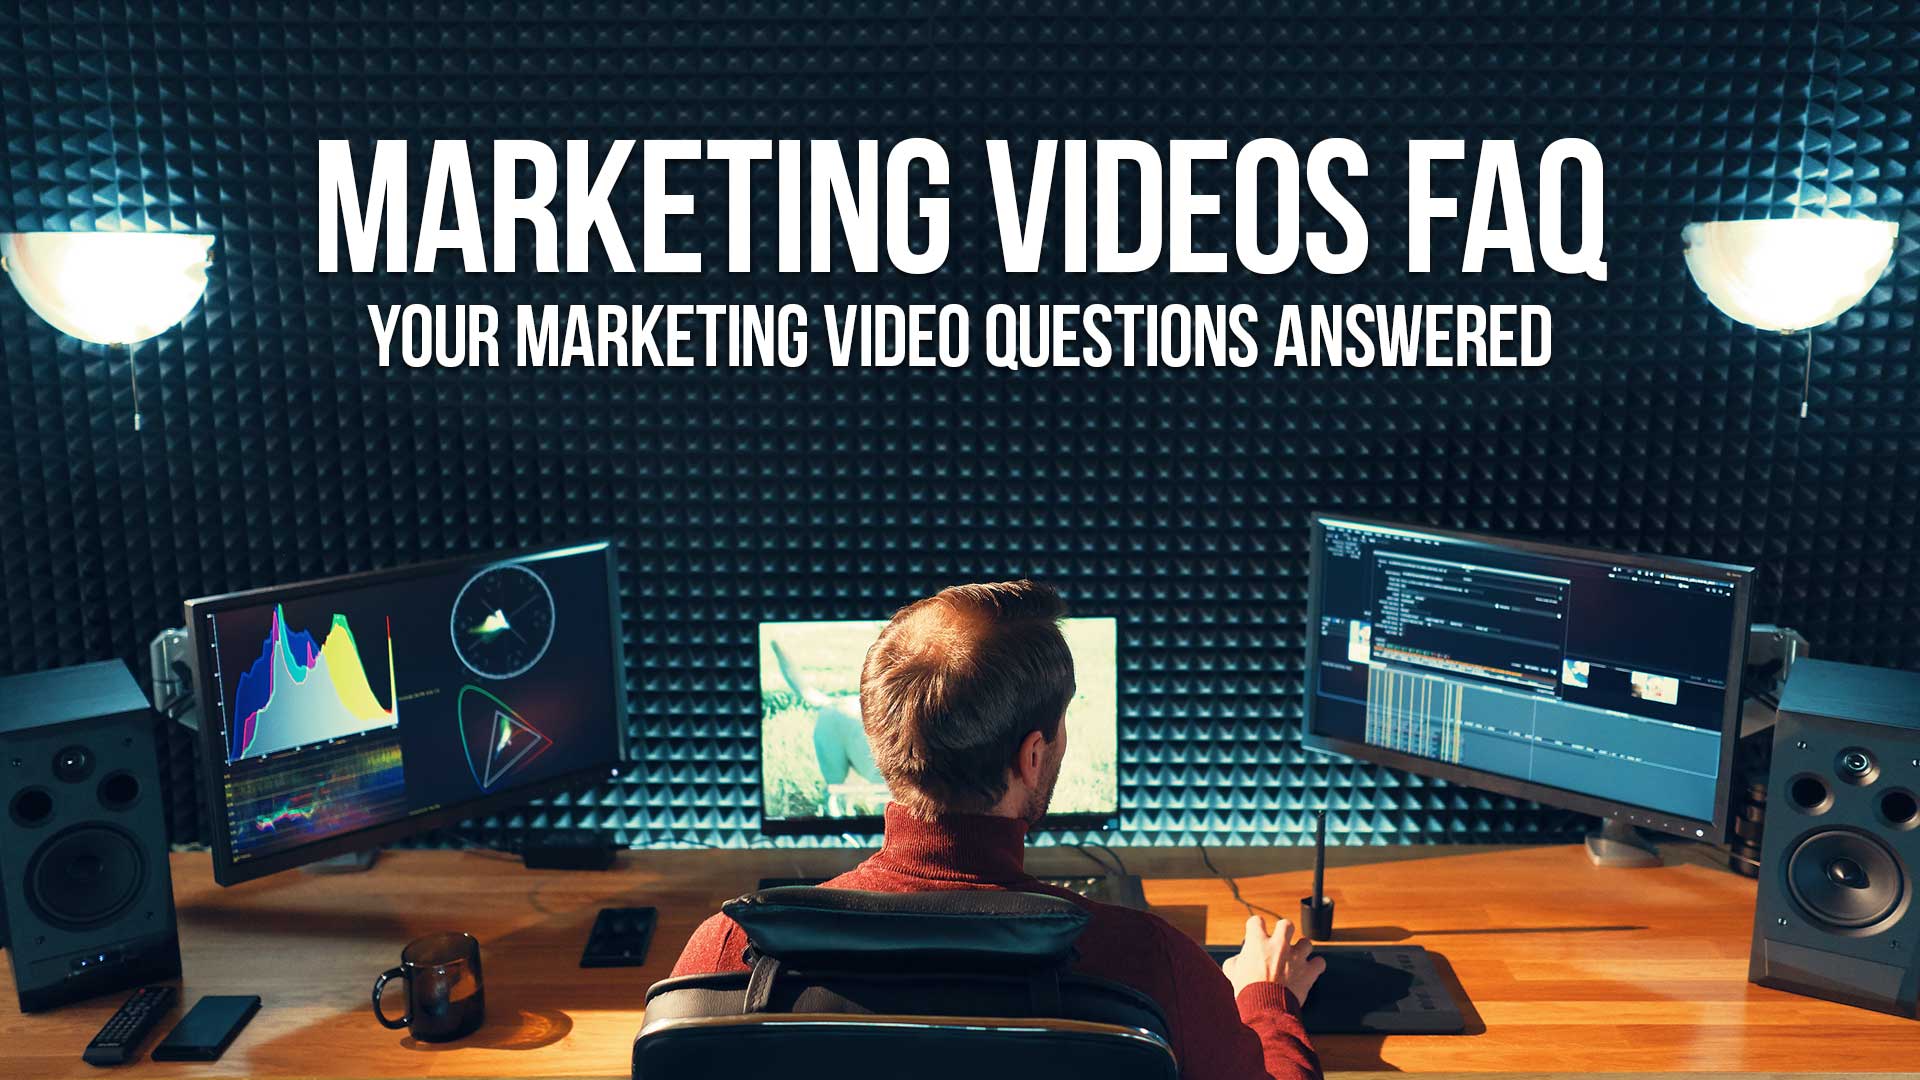 Marketing Videos for Business FAQ - Your Video Marketing Questions Answered!